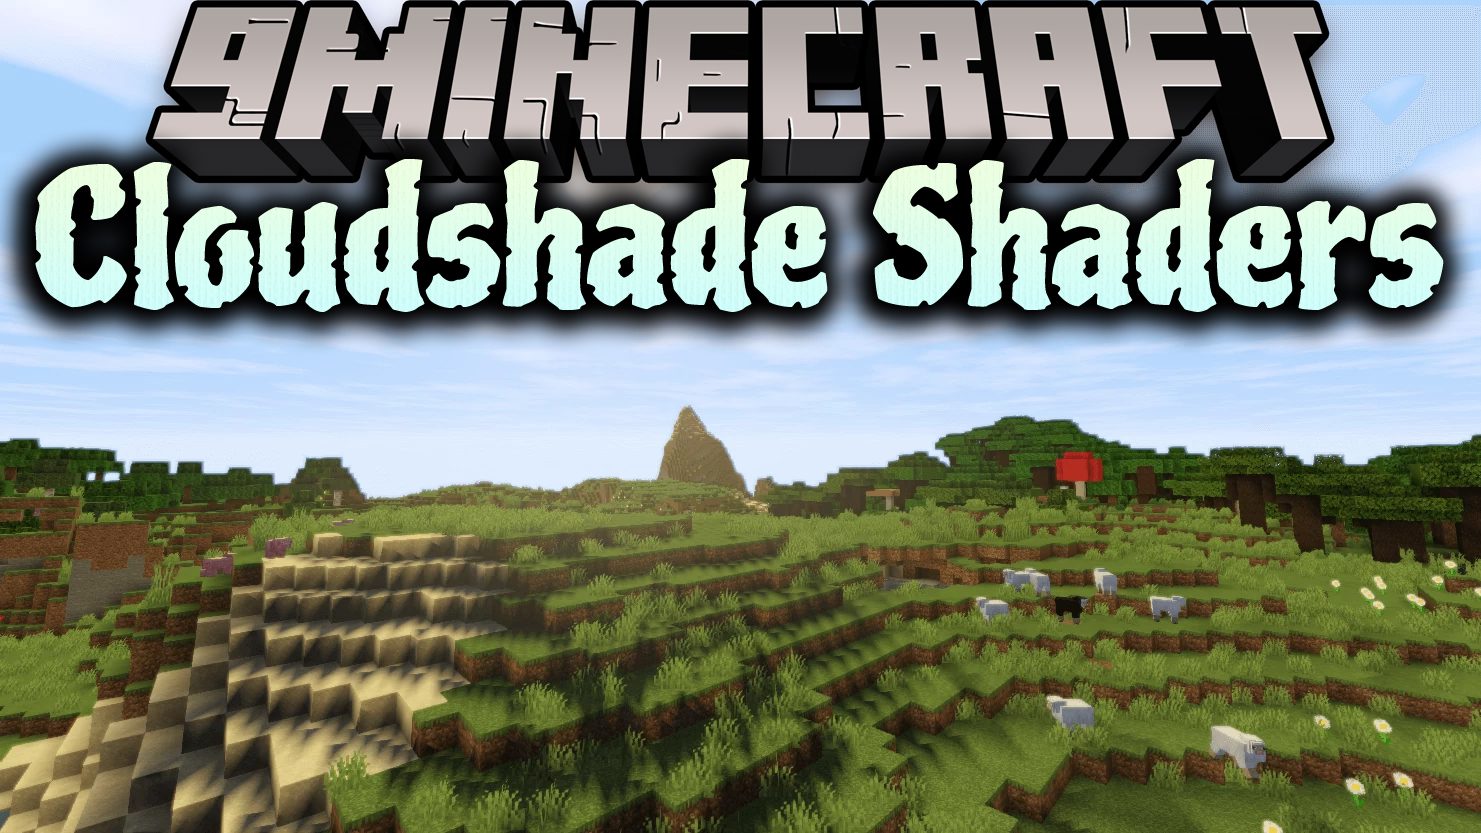 Cloudshade Shaders (1.20.4, 1.19.4) - Low End High Performance Shaders 1